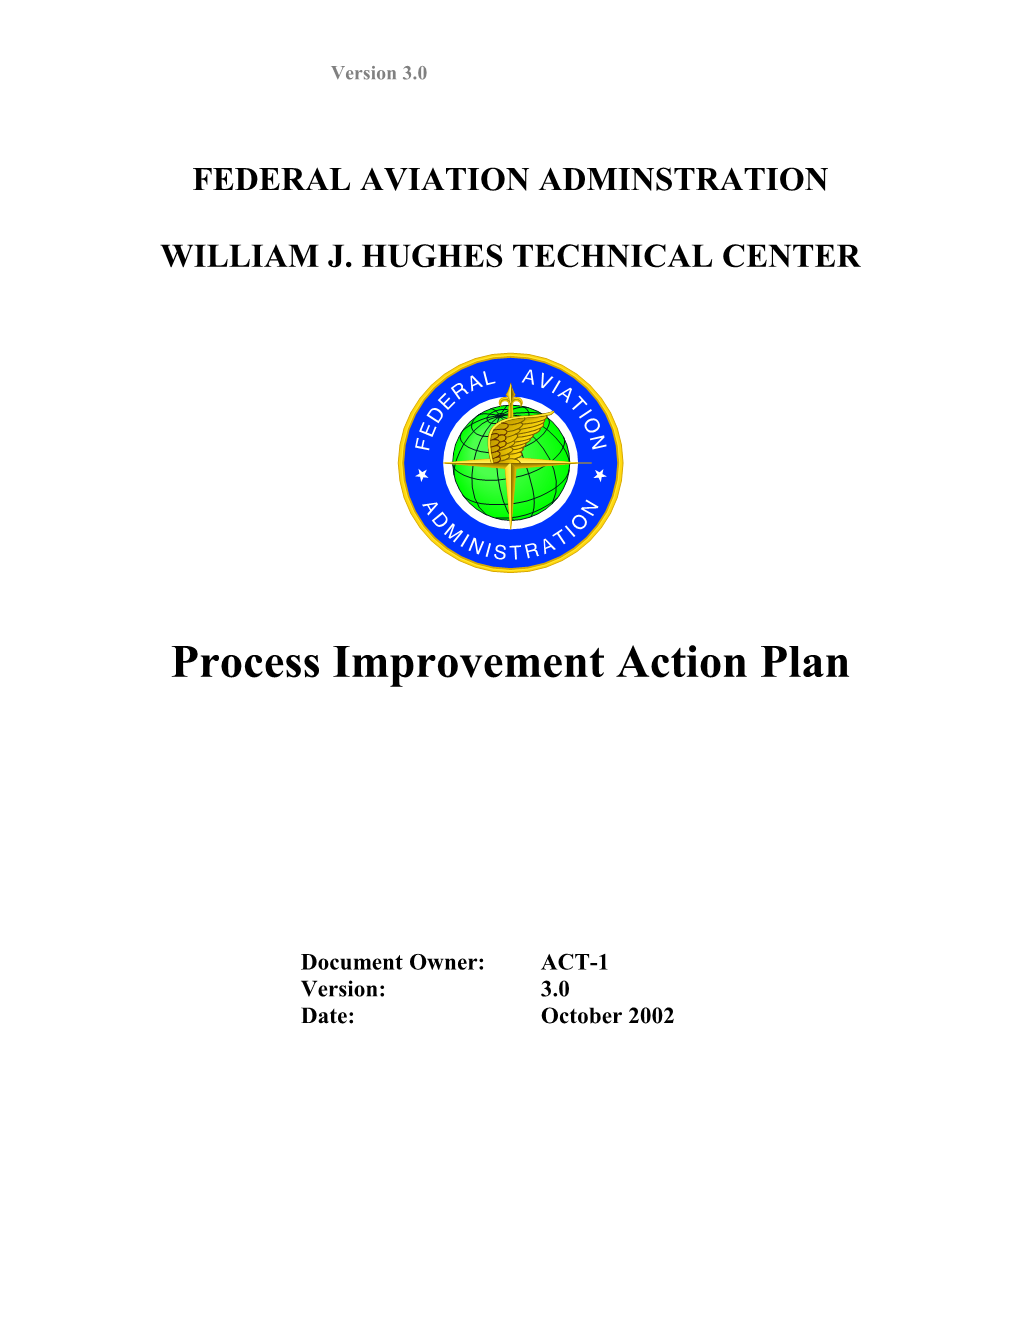 ACT Process Implementation Plan - FY 01